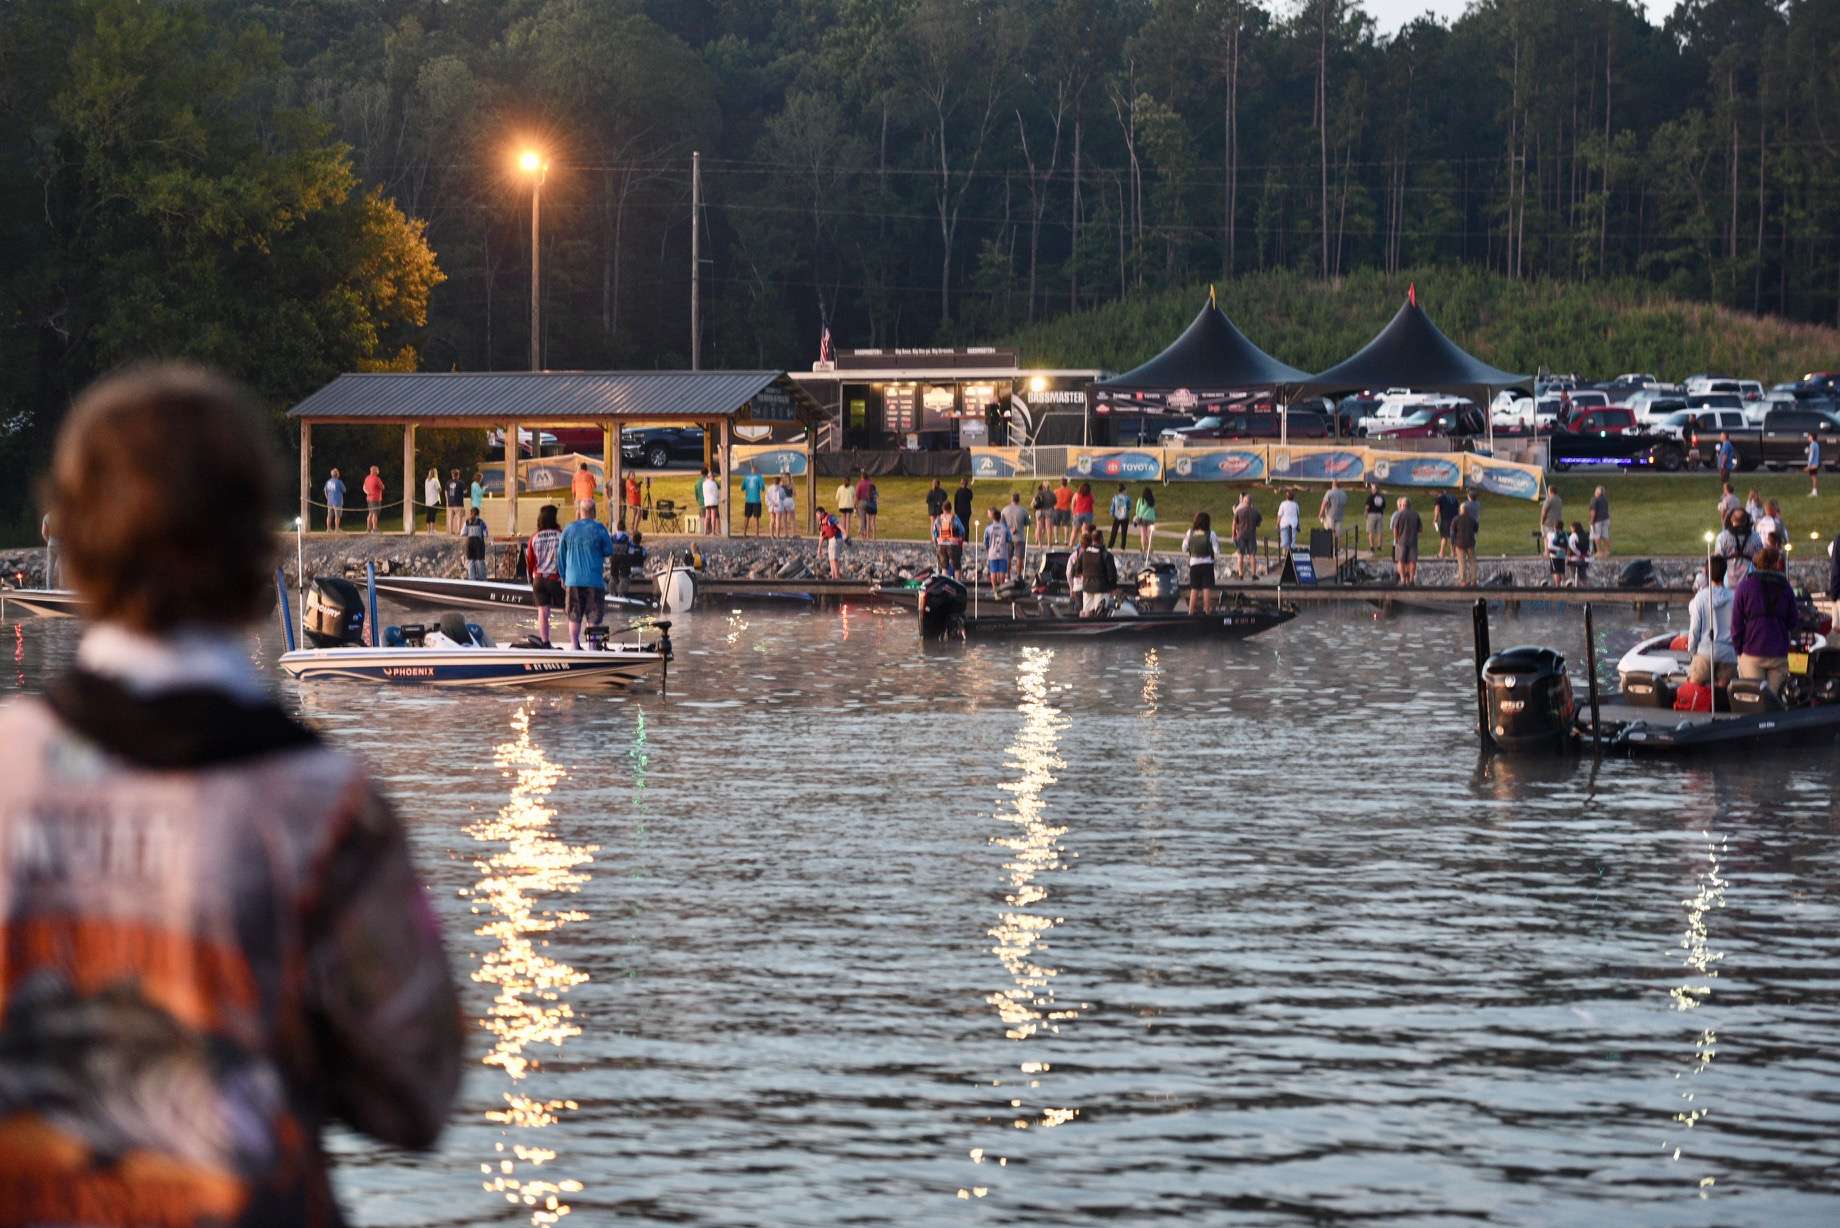 See the High School and Junior anglers head out for the 2021 Mossy Oak Fishing Bassmaster High School Series at Lay Lake presented by Academy Sports + Outdoors and the 2021 Mossy Oak Fishing Bassmaster Junior Series at Lay Lake! 